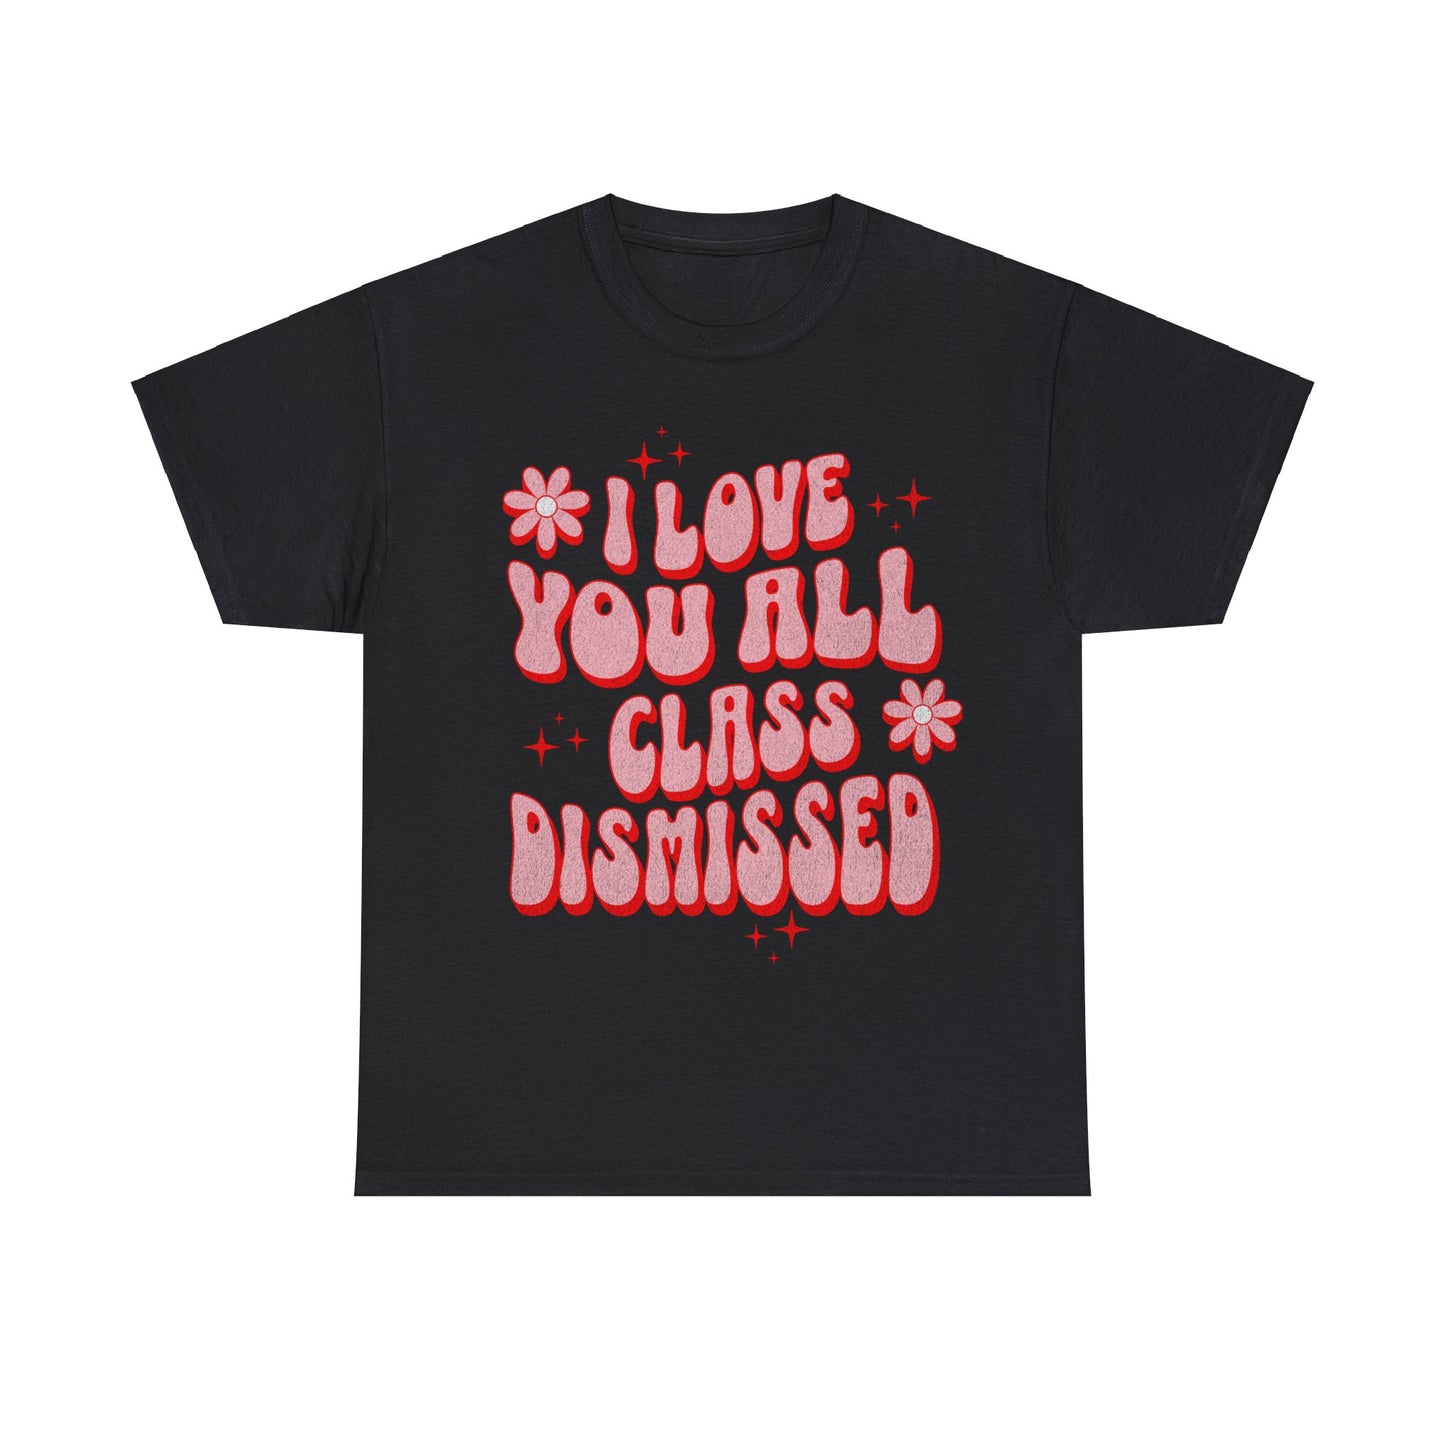 I Love You All, Class Dismissed - Unisex T-Shirt